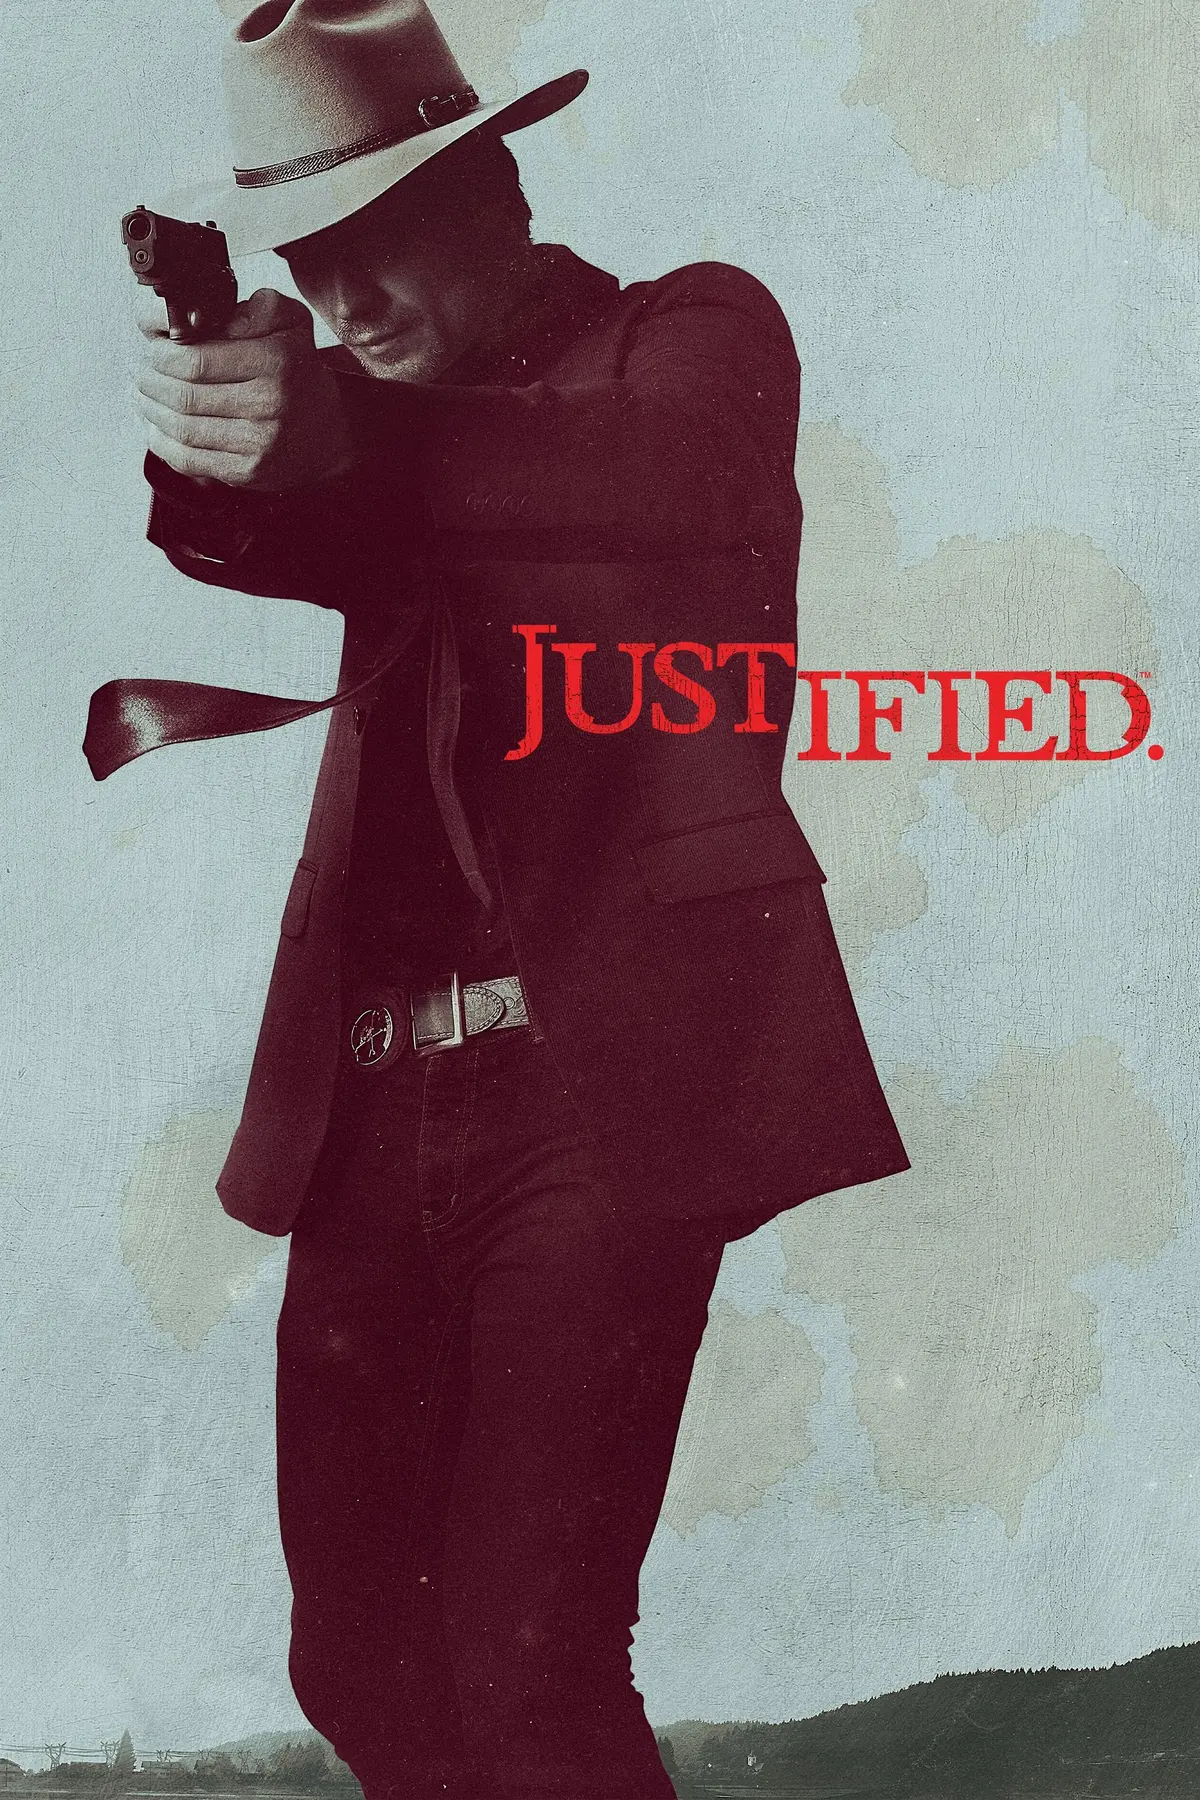 Justified S04E10 Chasse à l'homme